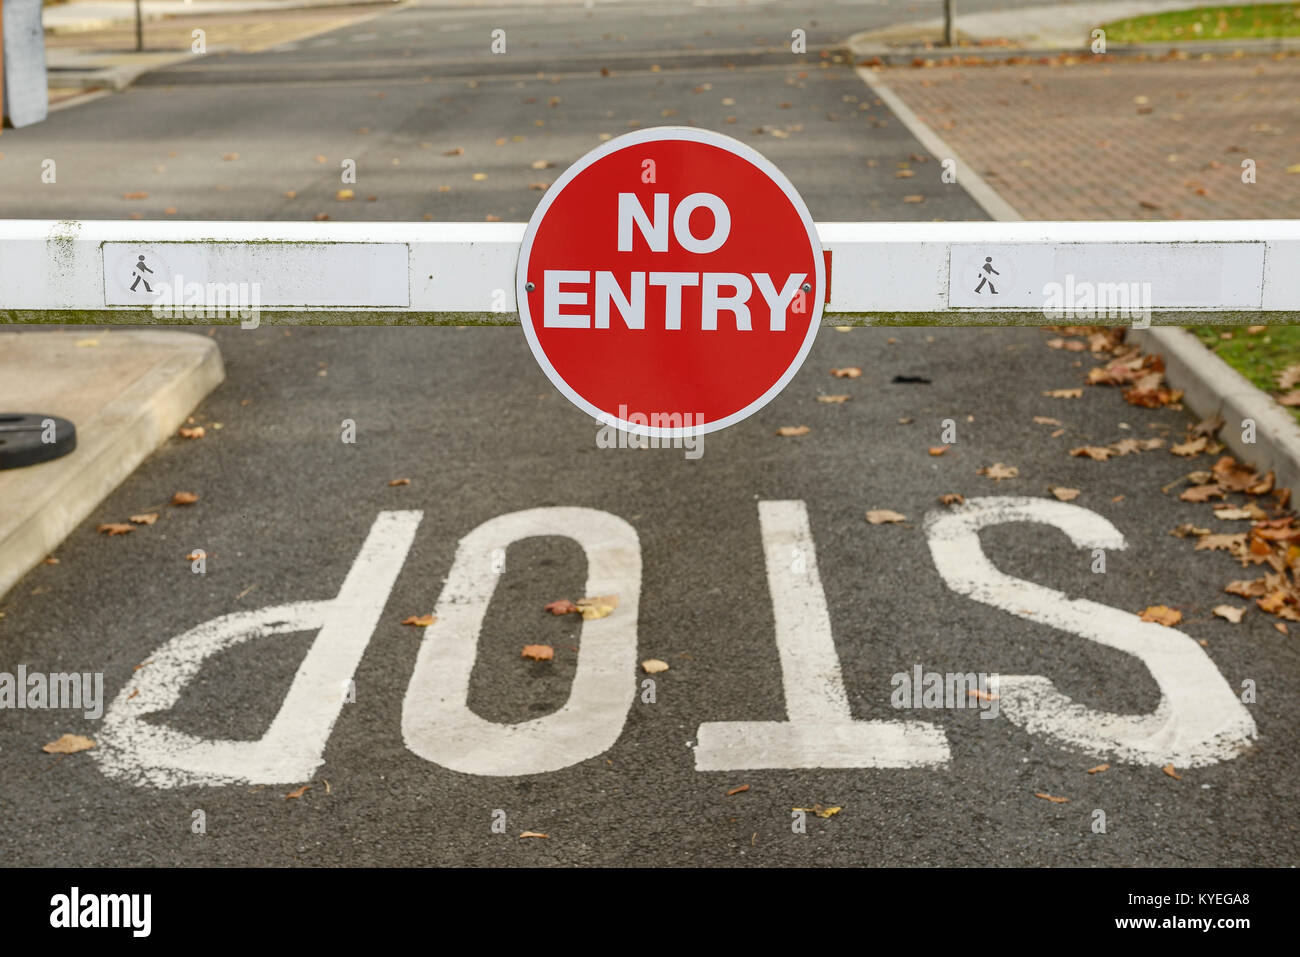 No Entry and Stop signs on a car park barrier Stock Photo